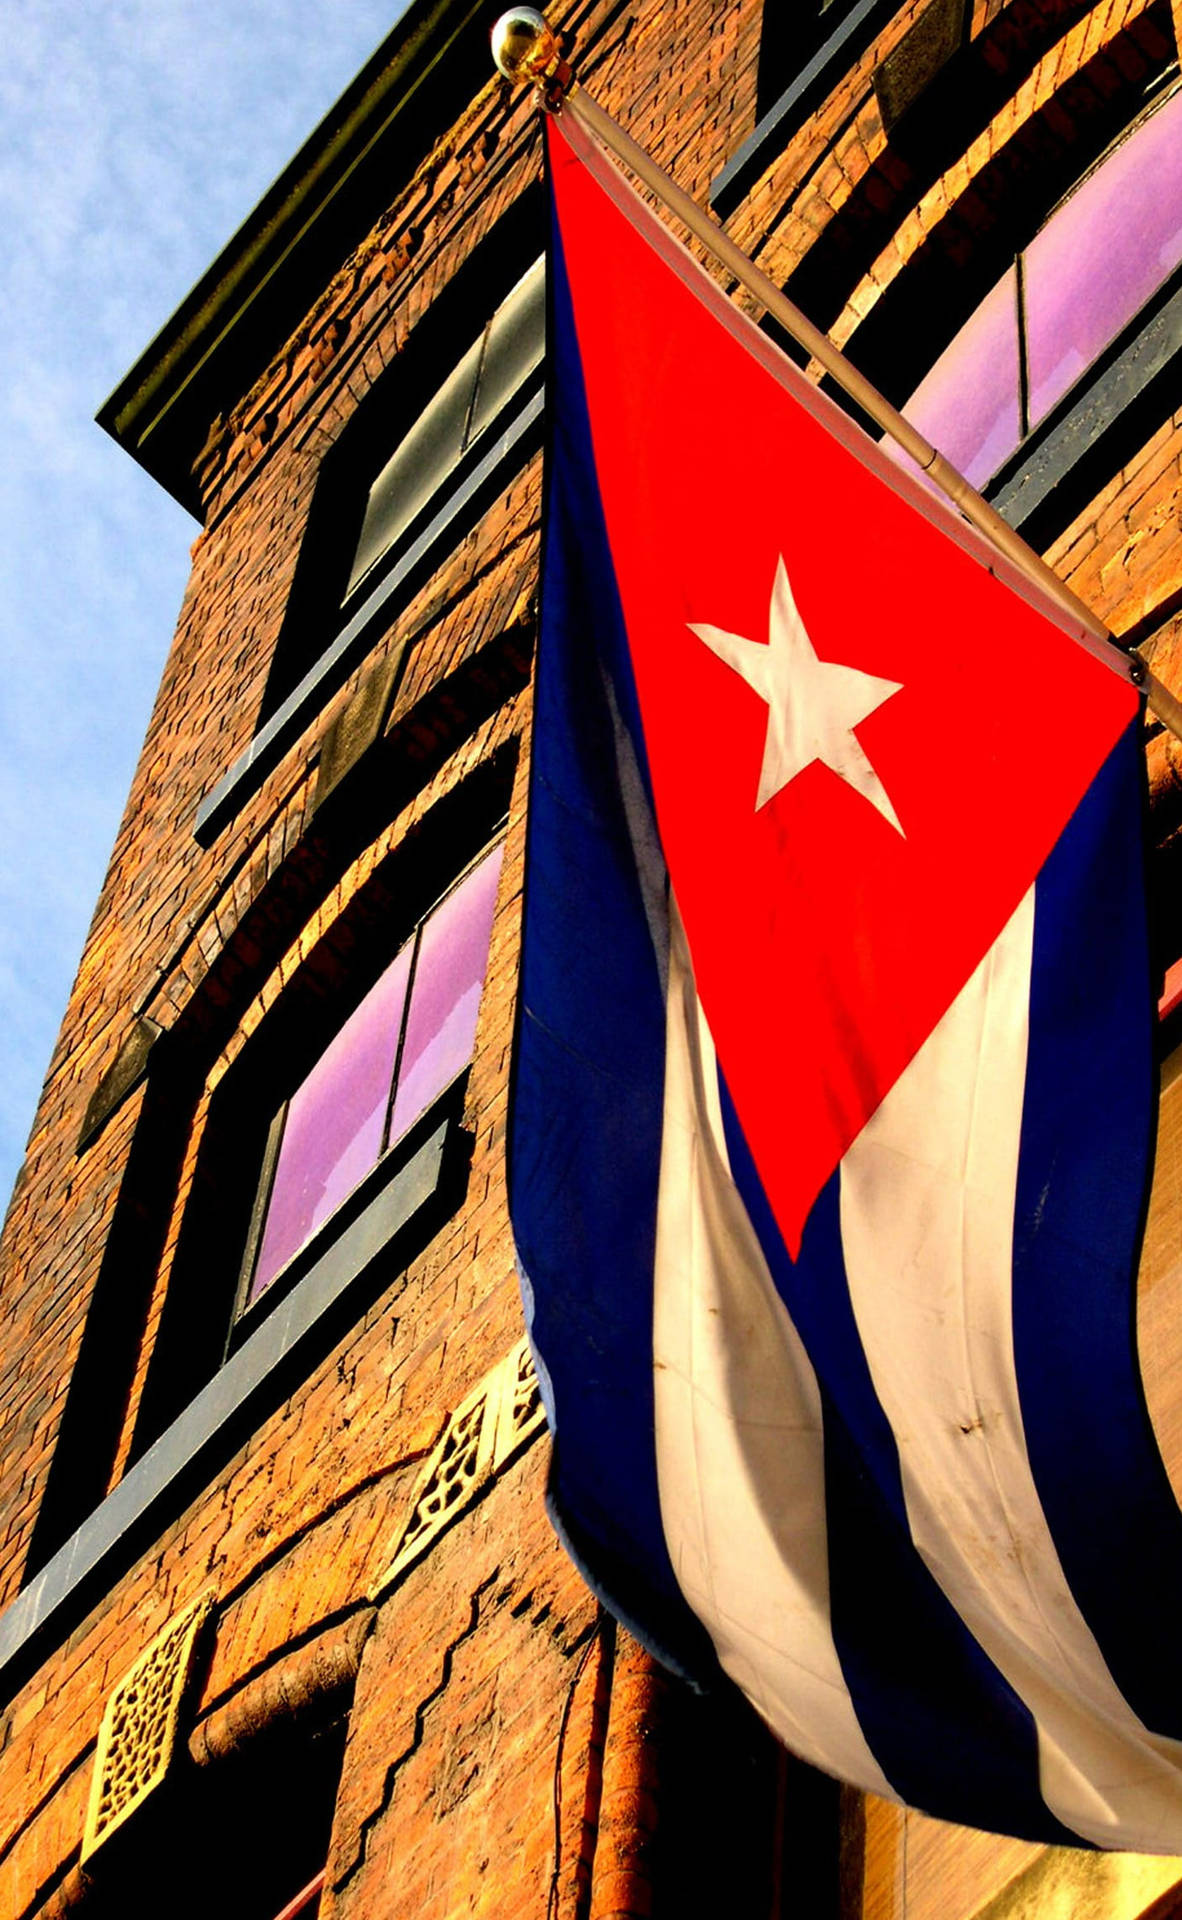 The Cuban Flag Proudly Displayed Outside A Building.